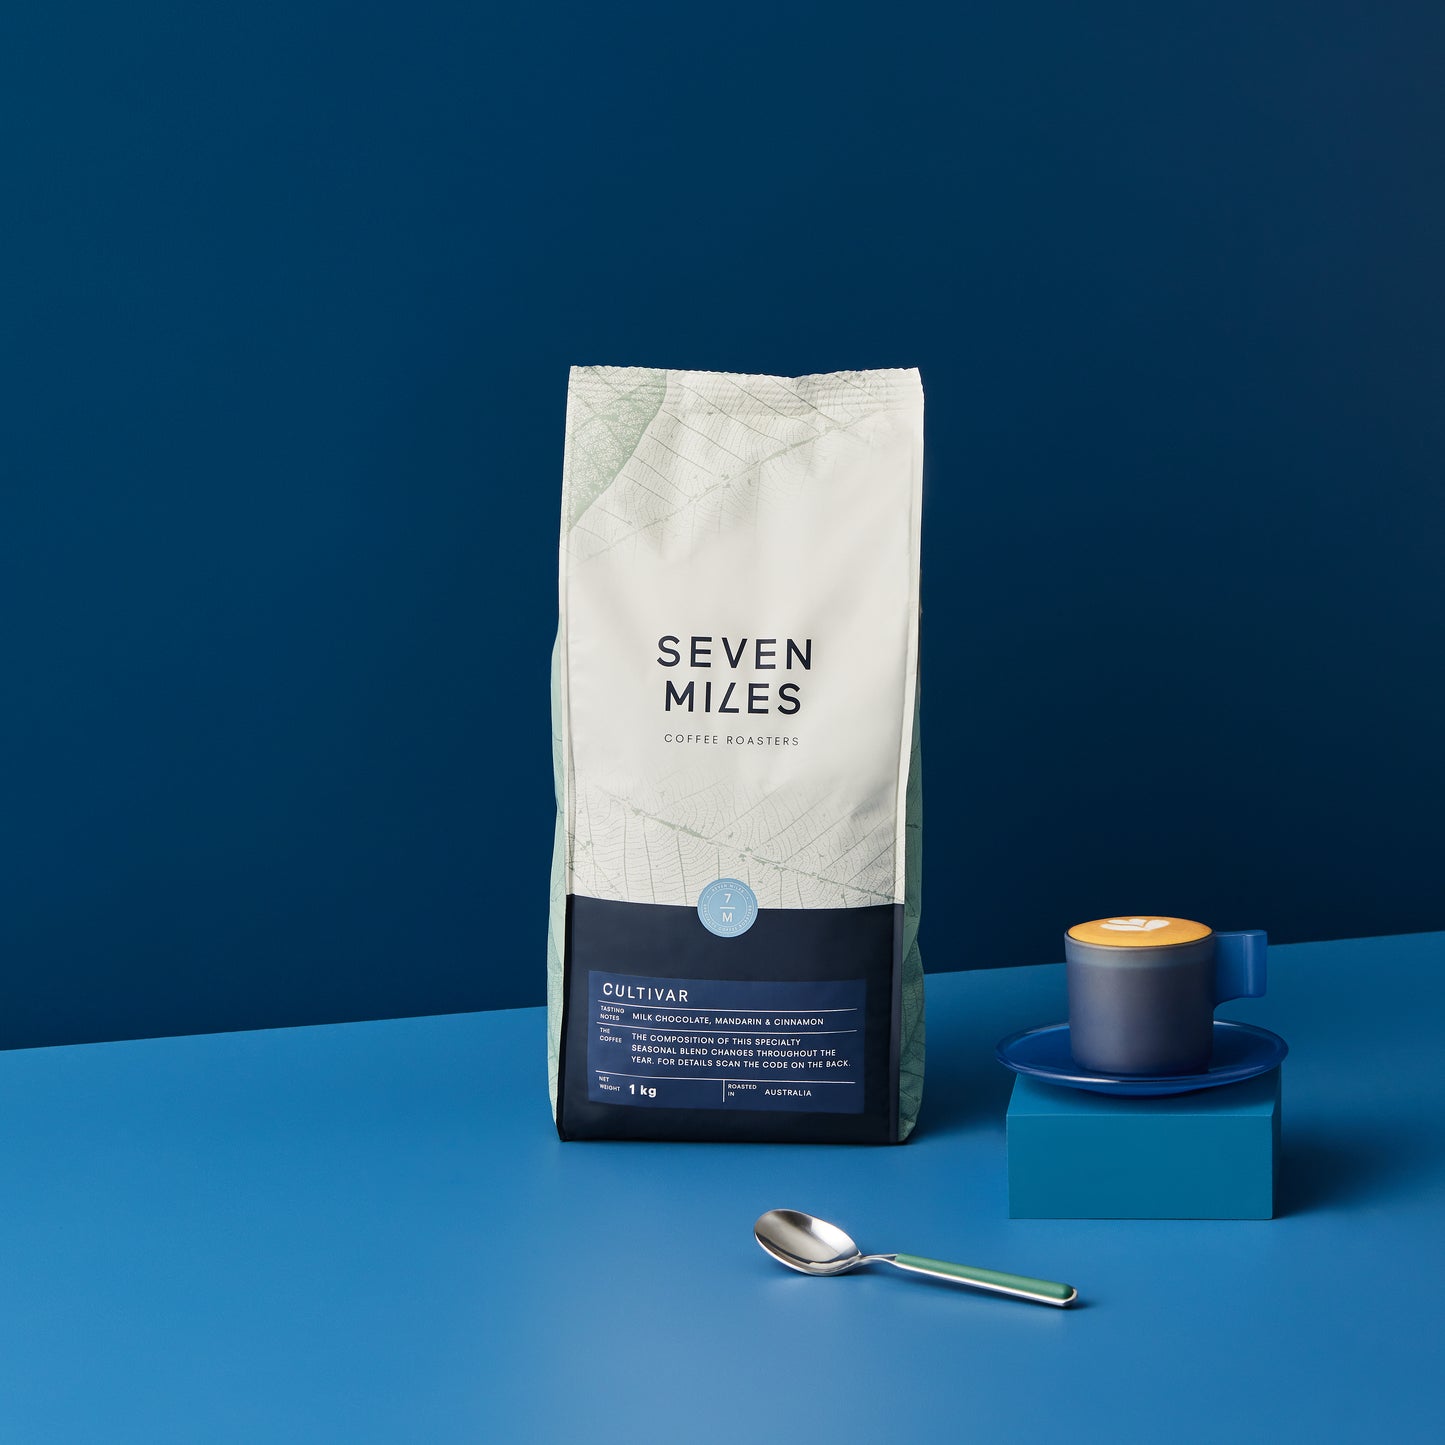 The Cultivar coffee blend is a washed Burundi, a Java that’s been processed through wet hulling, and a stunning natural Brazil from the Mountainous south-east Mantiqueira region. It delivers a beautifully balanced blend of creamy milk chocolate flavours combined with elegant notes of mandarin & cinnamon spice. 